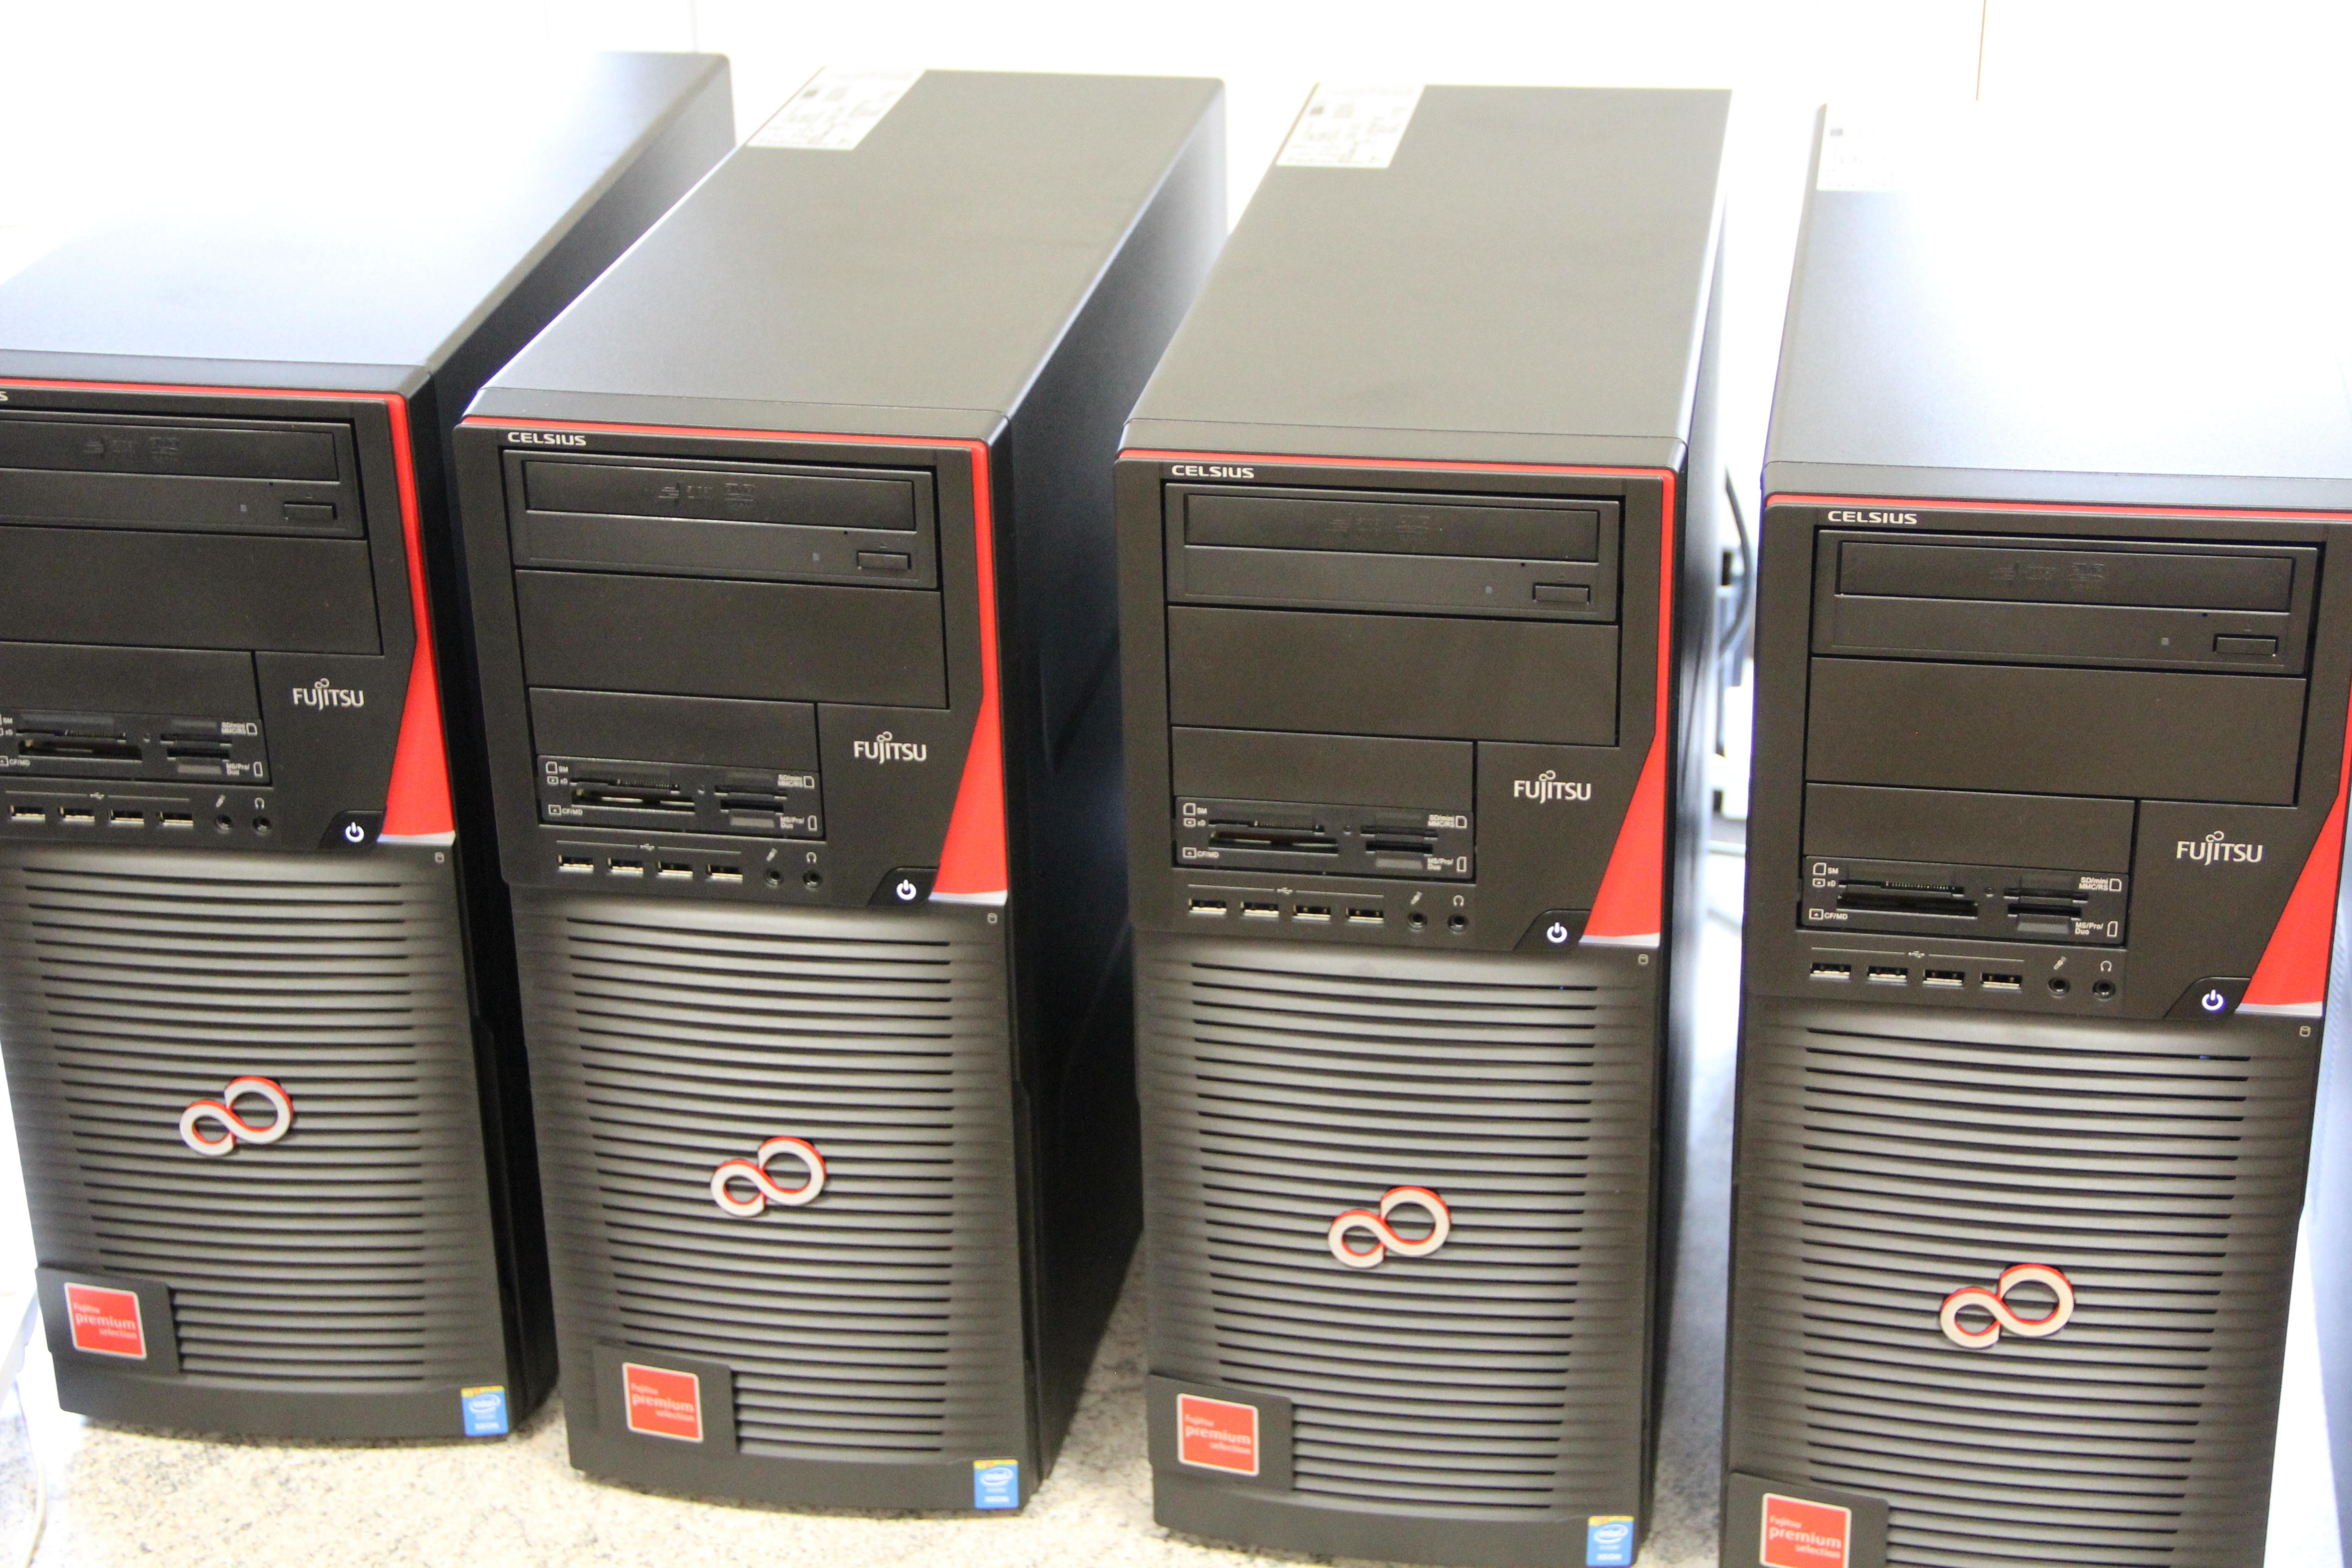 4 black and red computer towers